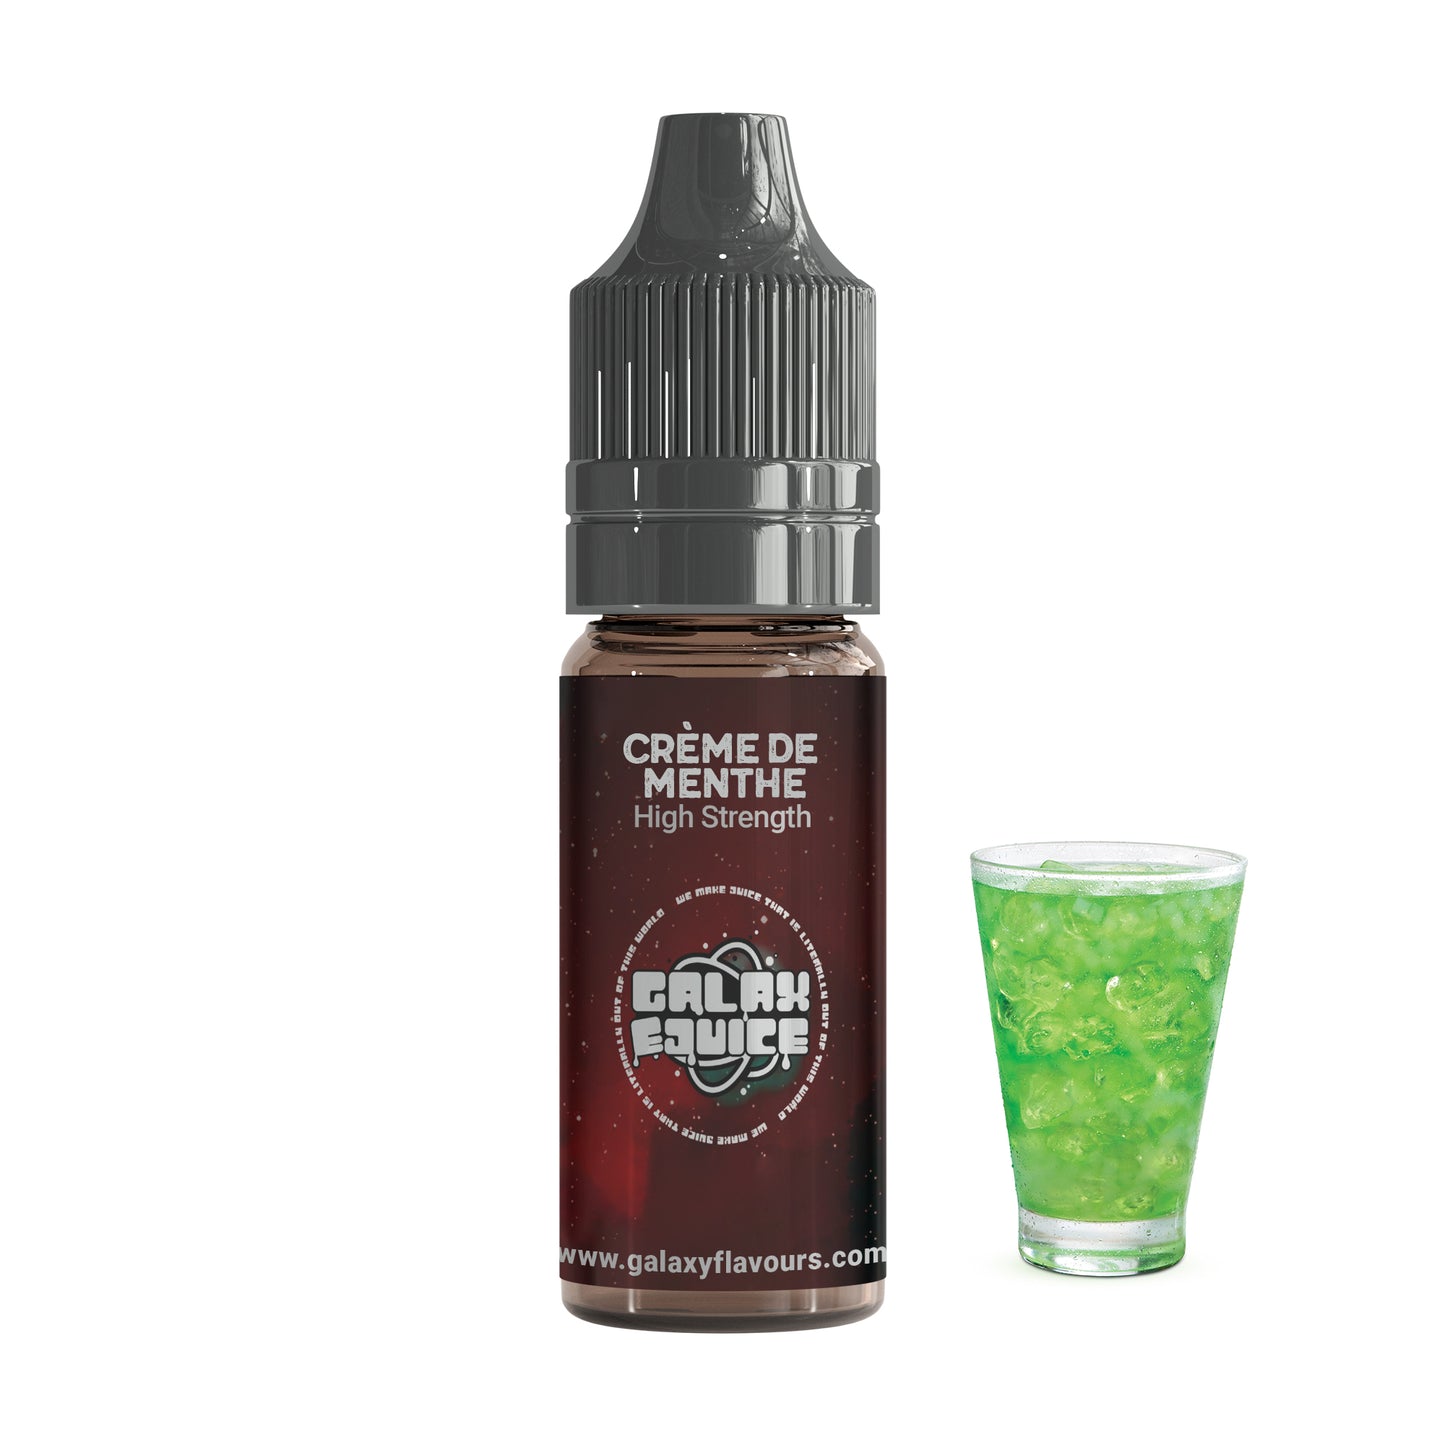 Creme De Menthe High Strength Professional Flavouring.